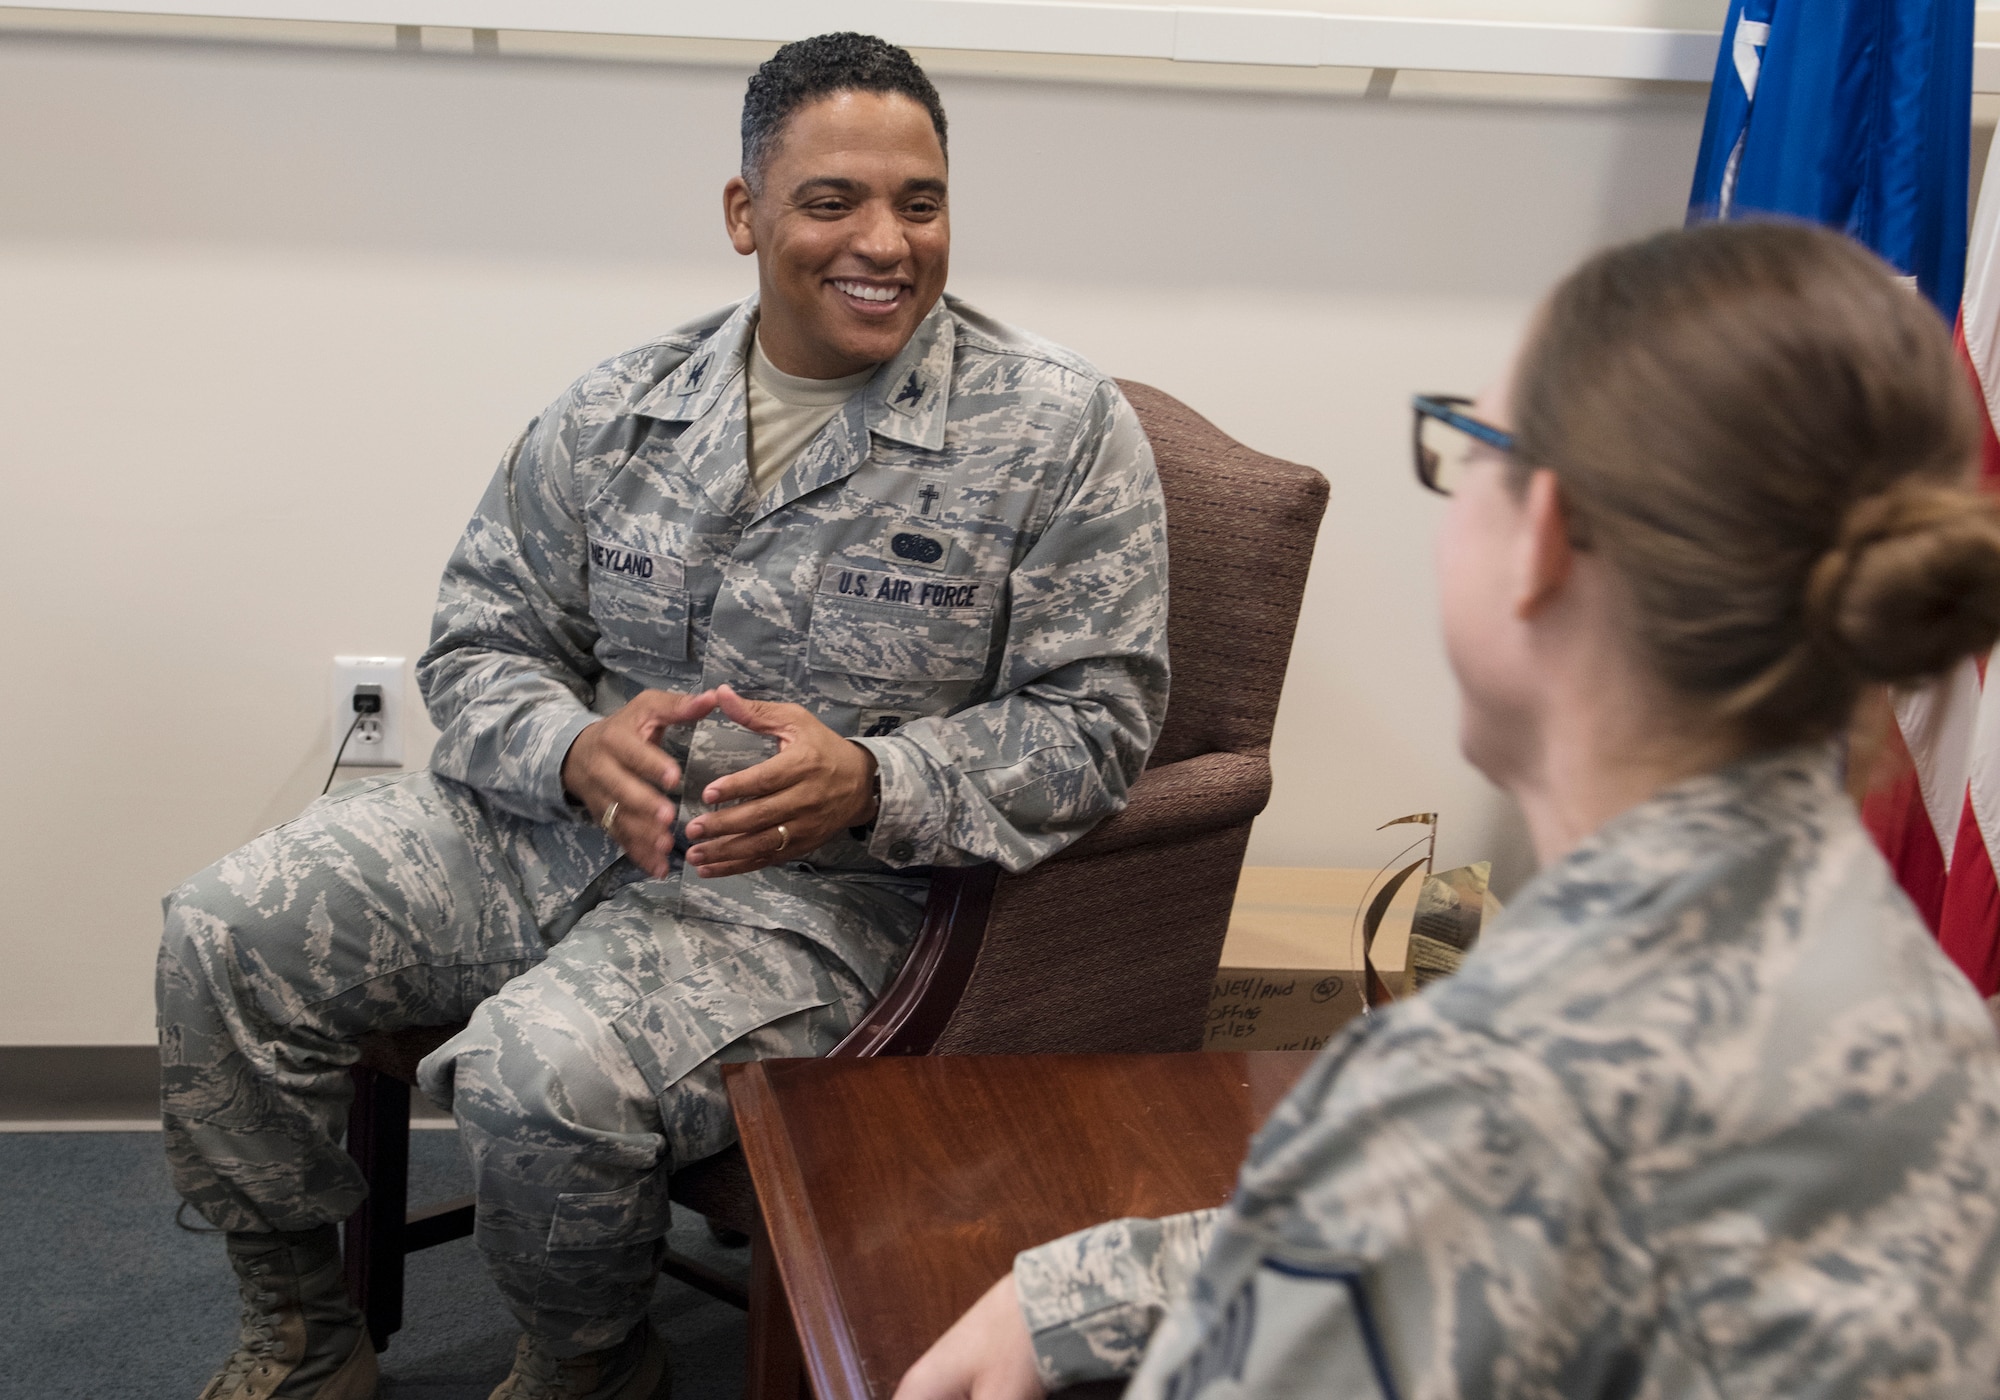 Chaplain (Col.) Shon Neyland, Pacific Air Forces Command Chaplain, speaks with Master Sgt. Kristen Allen, religious affairs, in his office at Headquarters PACAF, Joint Base Pearl Harbor-Hickam, Hawaii, Sept. 5, 2018.